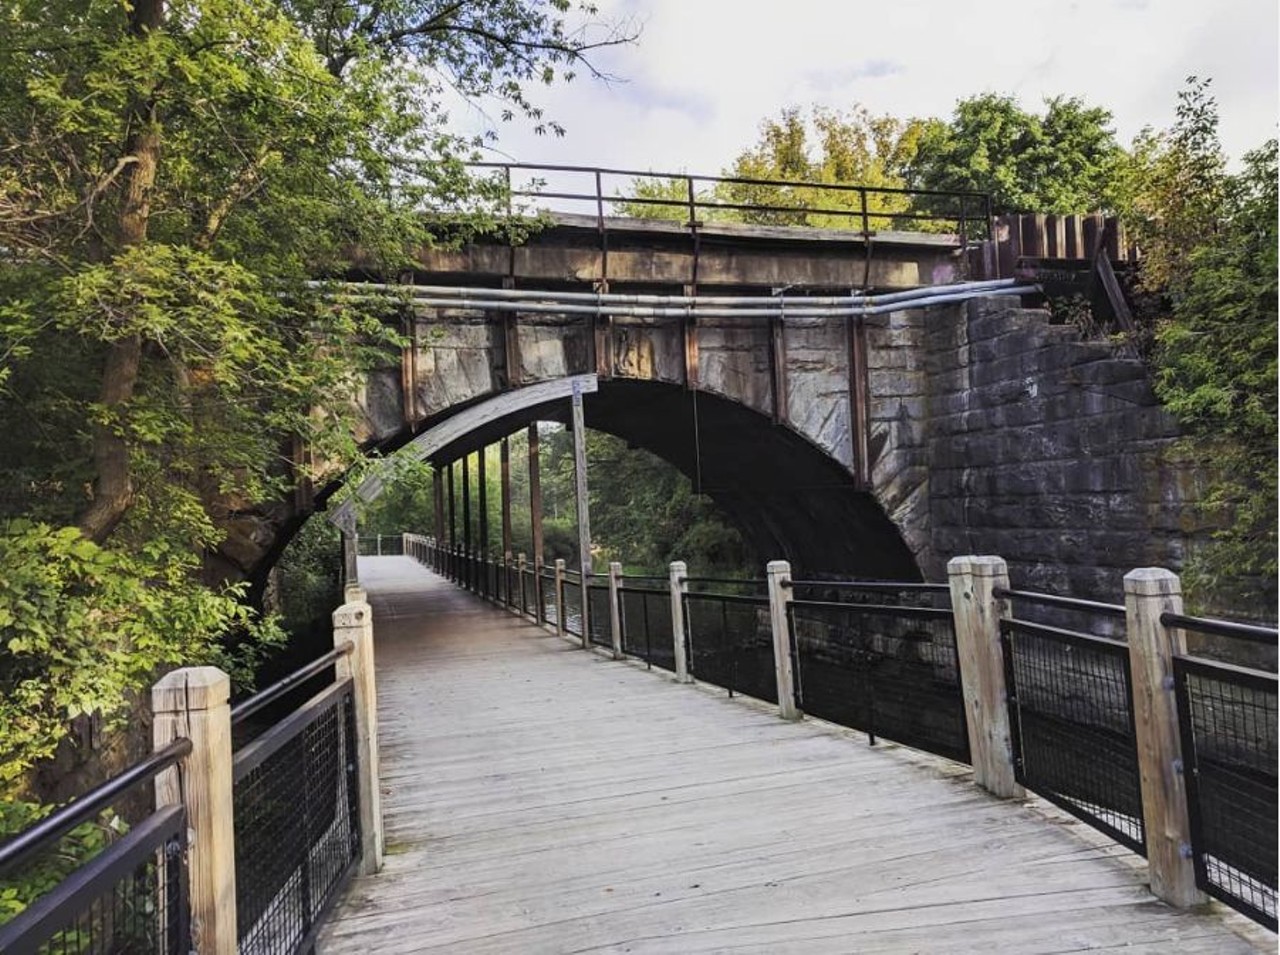 Border-to-Border Trail
Ann Arbor
This extensive trail goes on for about ten miles, following the Huron River. The trail connects Hudson Mills metro park to downtown Dexter. Along the way, you&#146;ll see great views of the river, bikers, hikers, and joggers, and walk by University of Michigan&#146;s medical campus.
Photo via Instagram user @meekphoto